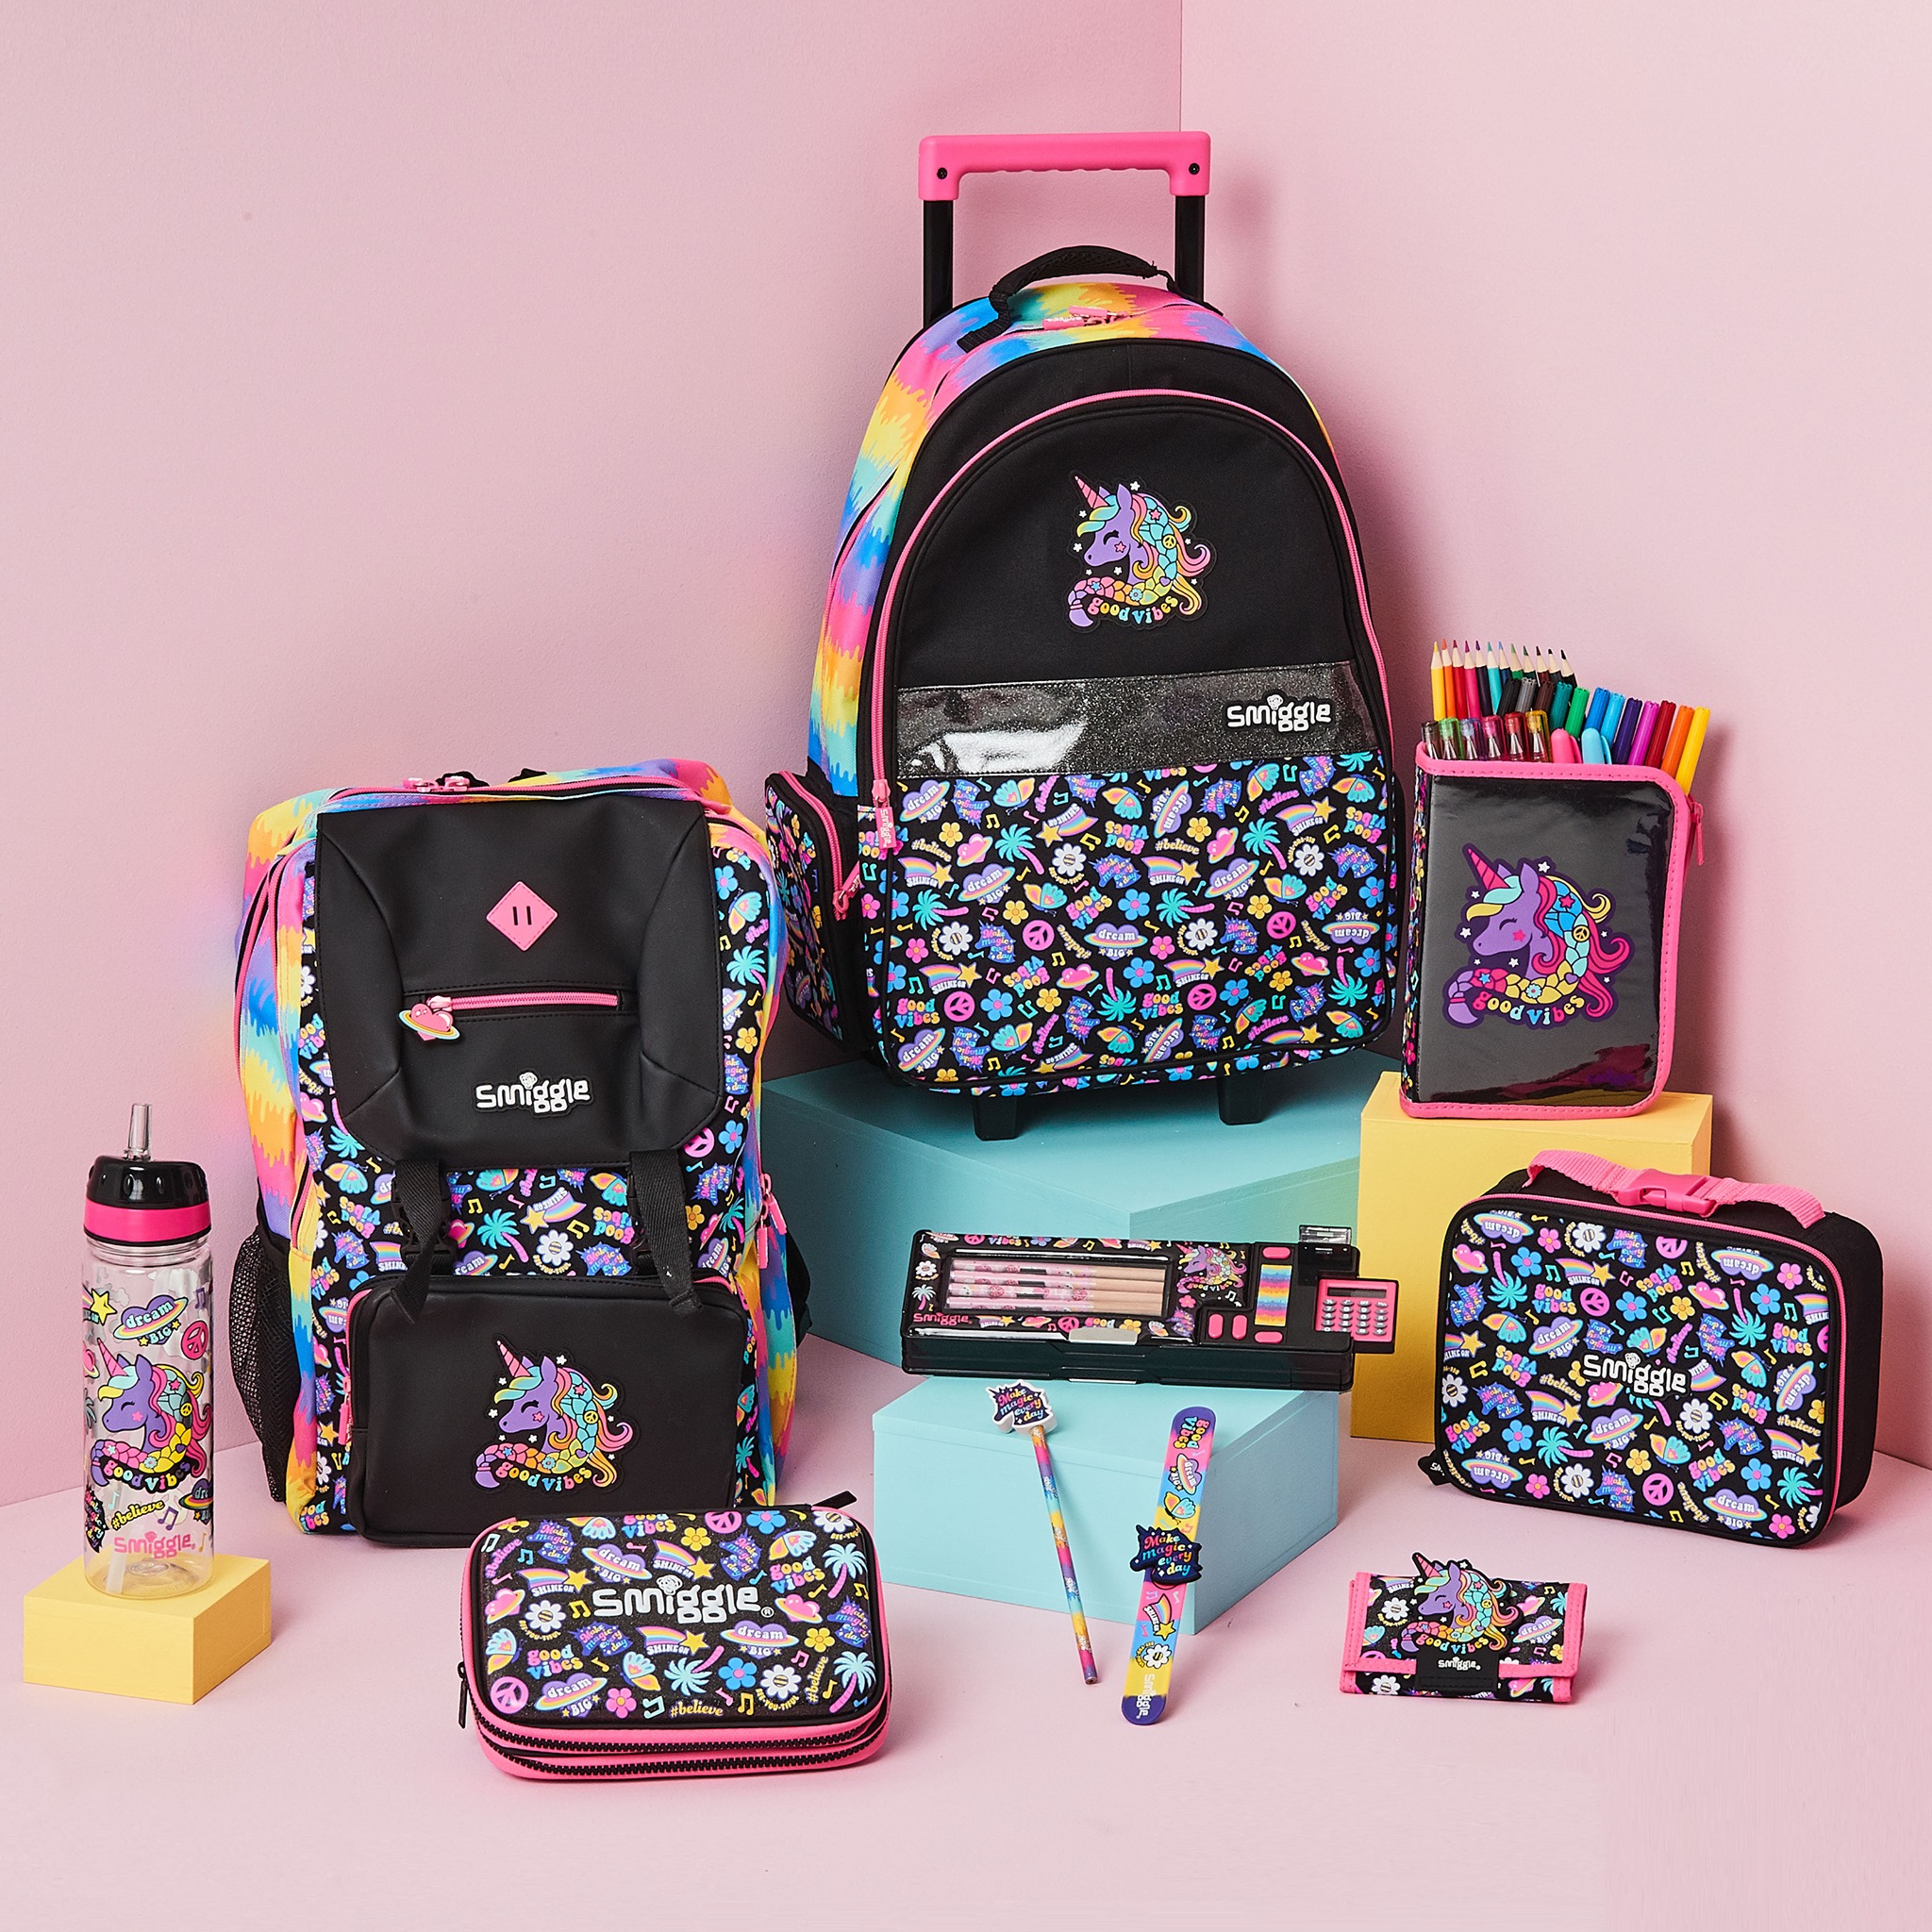 How do you EXPRESS yourself? 🤩 shop our Express collection is here! 🦄 Shop instore now! 